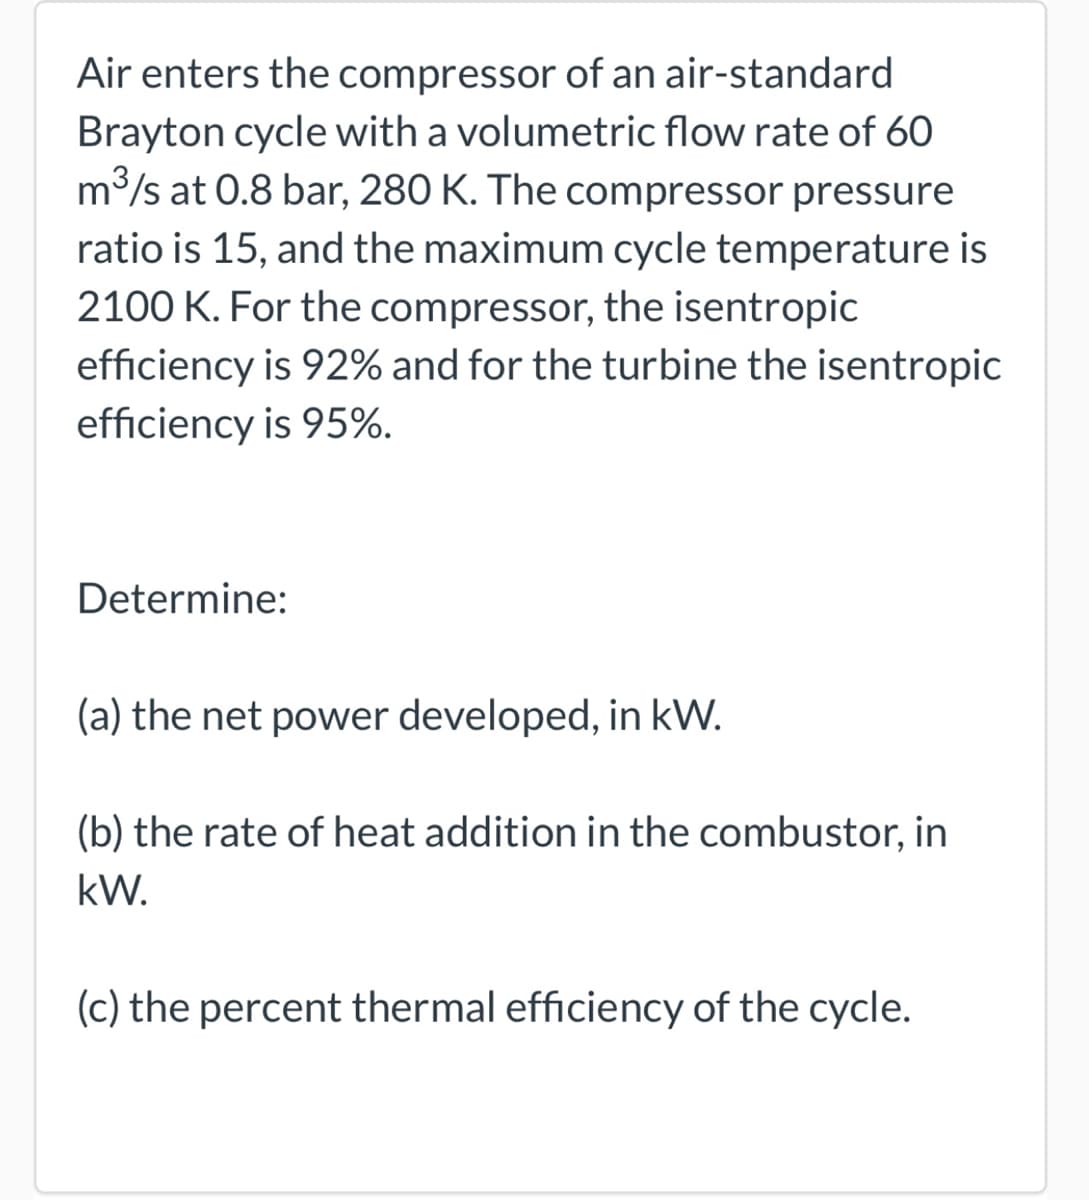 Air enters the compressor of an air-standard
Brayton cycle with a volumetric flow rate of 60
m³/s at 0.8 bar, 280 K. The compressor pressure
ratio is 15, and the maximum cycle temperature is
2100 K. For the compressor, the isentropic
efficiency is 92% and for the turbine the isentropic
efficiency is 95%.
Determine:
(a) the net power developed, in kW.
(b) the rate of heat addition in the combustor, in
kW.
(c) the percent thermal efficiency of the cycle.